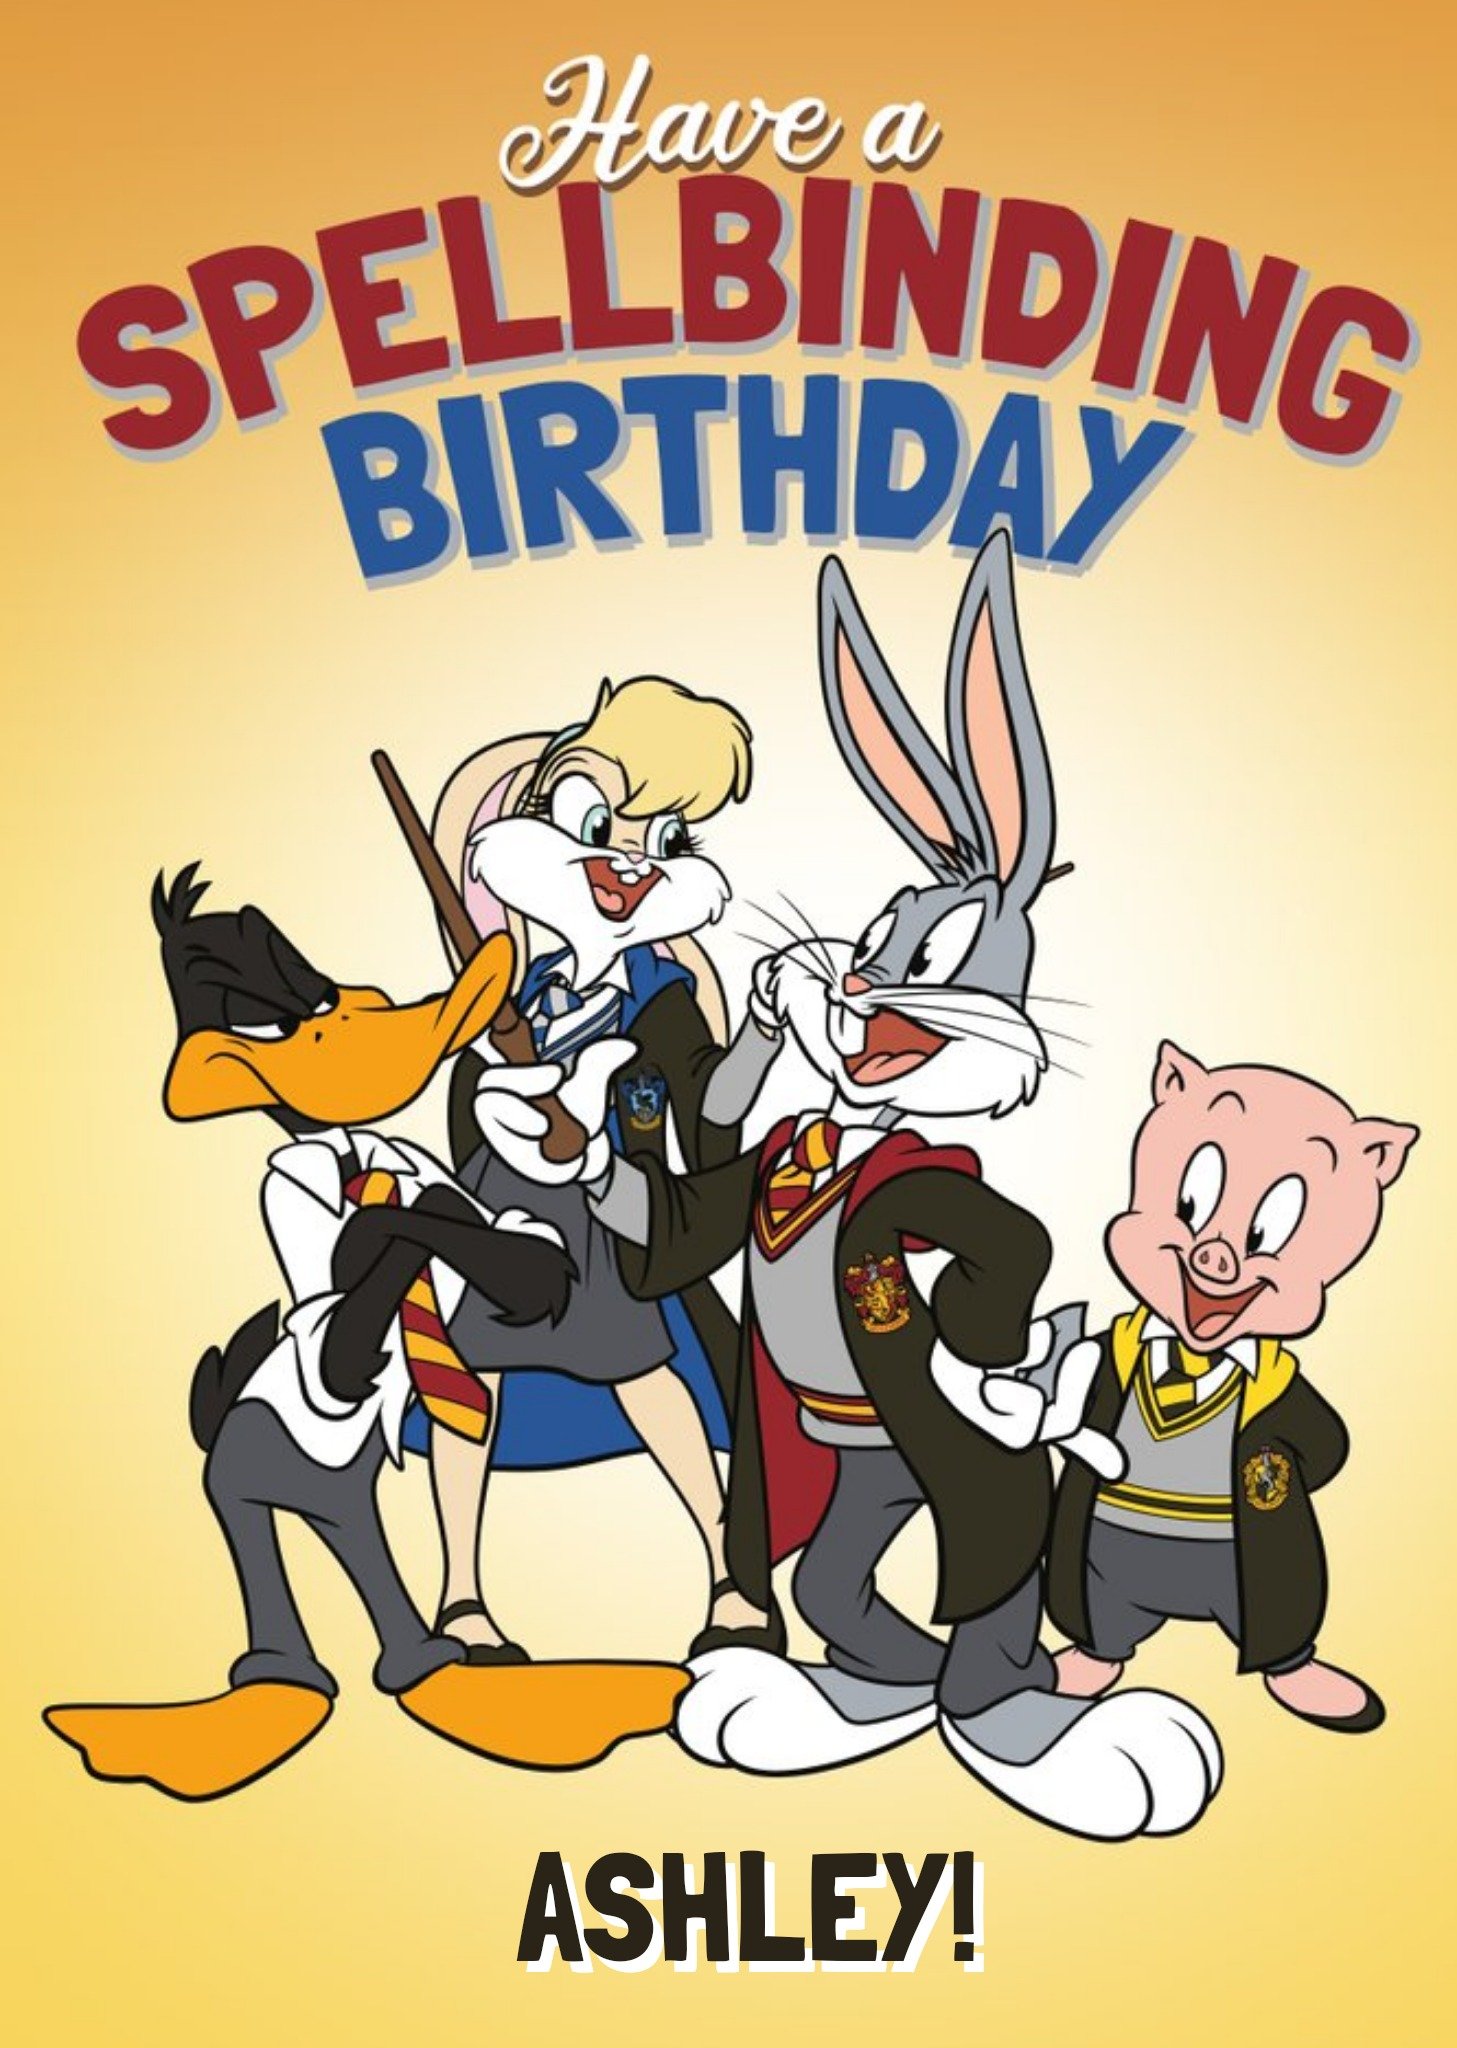 Moonpig Warner Brothers 100 Have A Spellbinding Birthday Card, Large